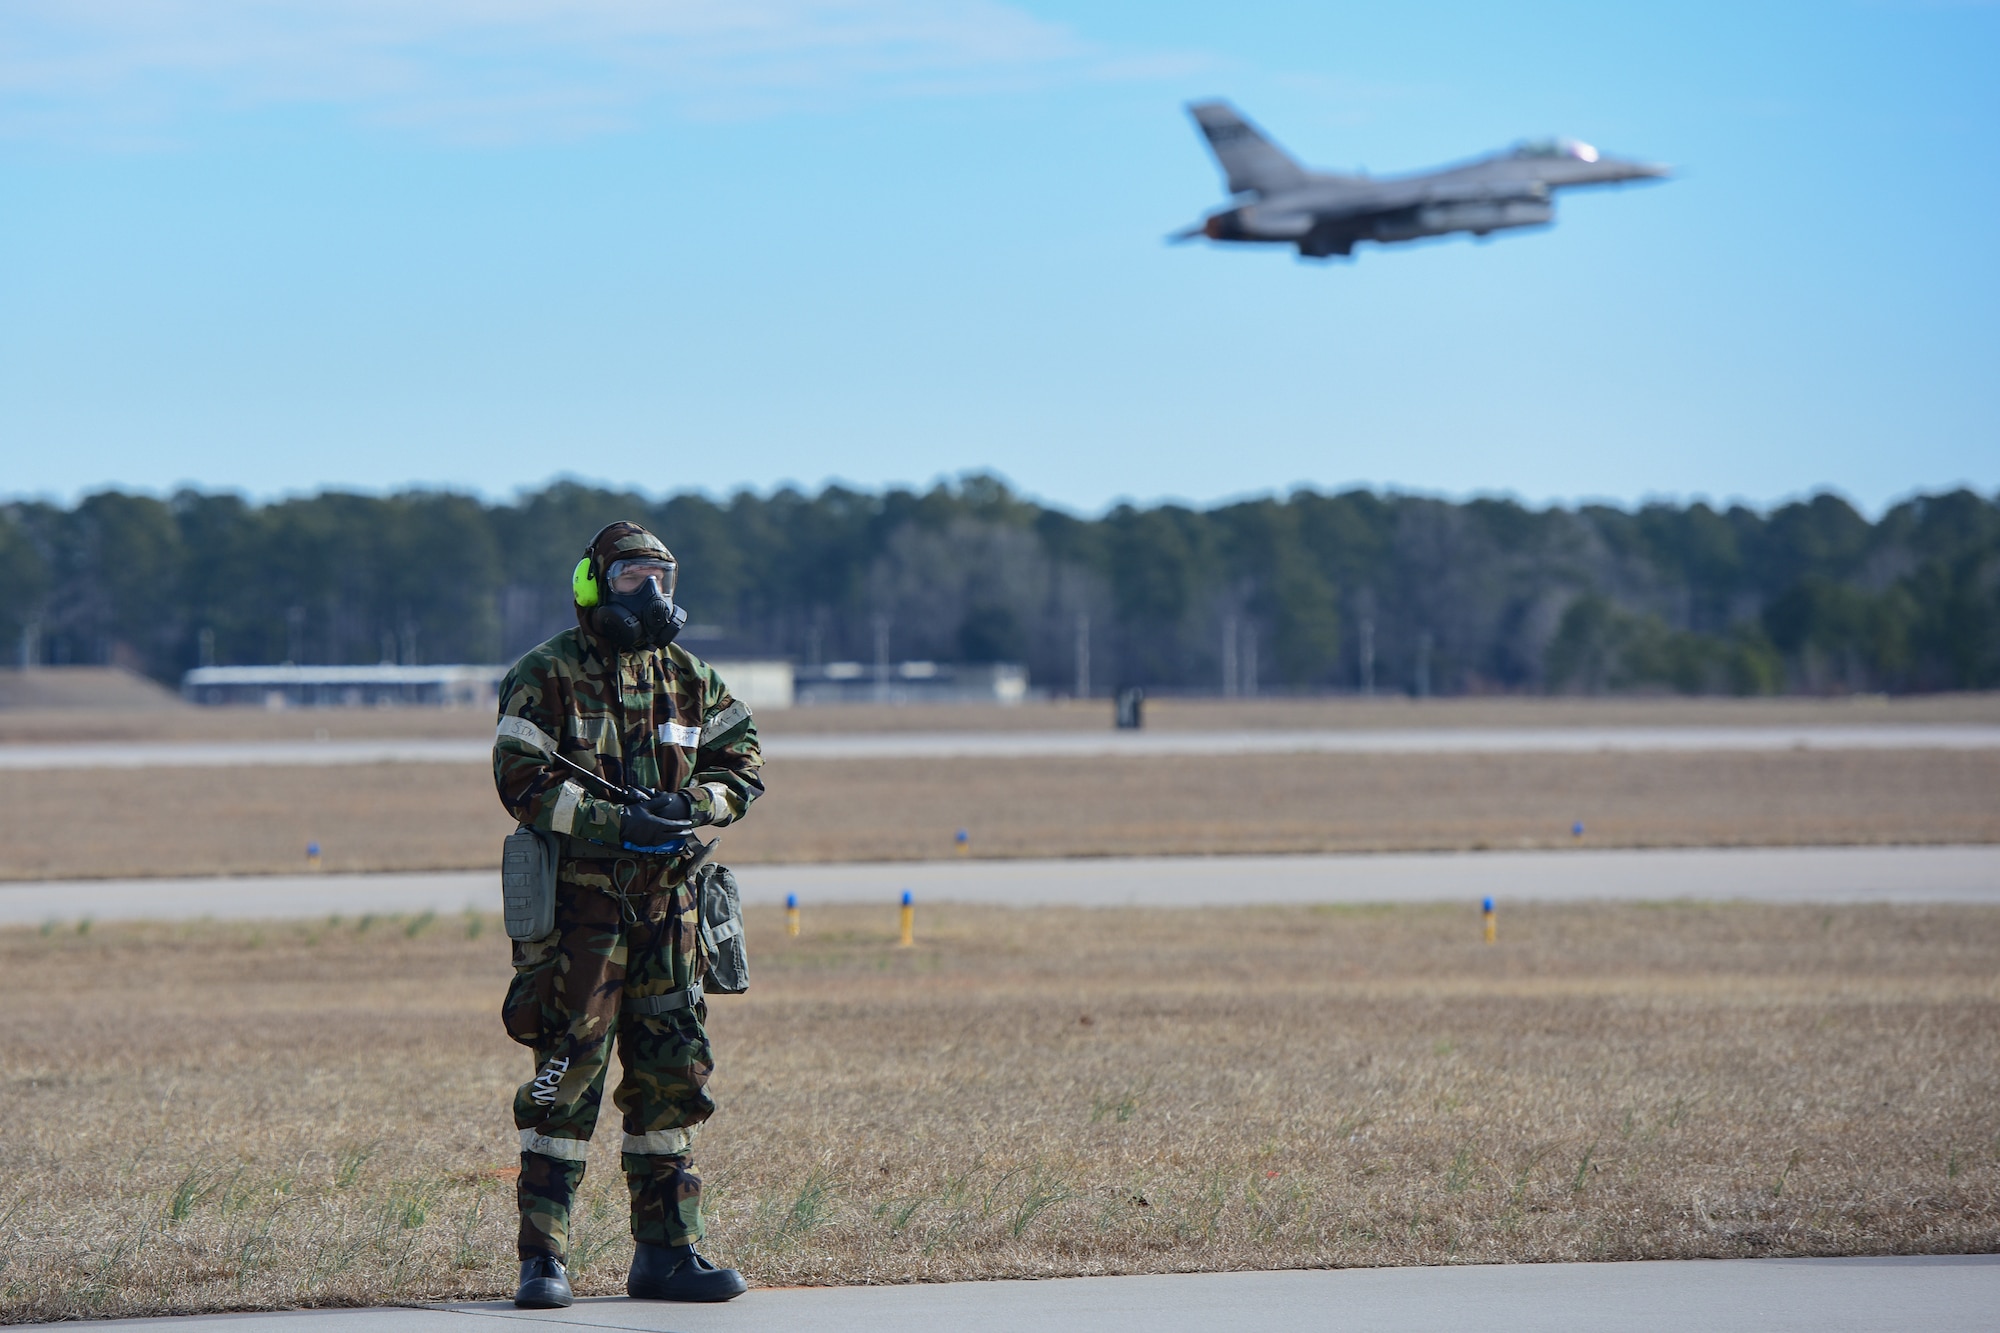 U.S. Air Force Airmen, assigned to the South Carolina Air National Guard’s 169th Fighter Wing, participate in an exercise that measures the ability to survive and operate in chemical warfare equipment at McEntire Joint National Guard Base, S.C., Feb. 3, 2018. Swamp Fox Airmen continue to hone routine skills to meet combatant command requirements. The muscle memory that is formed by using this equipment multiple times allows Airmen the ability to focus their attention on completing the mission under austere conditions. (U.S. Air National Guard photo by Senior Airman Megan Floyd)